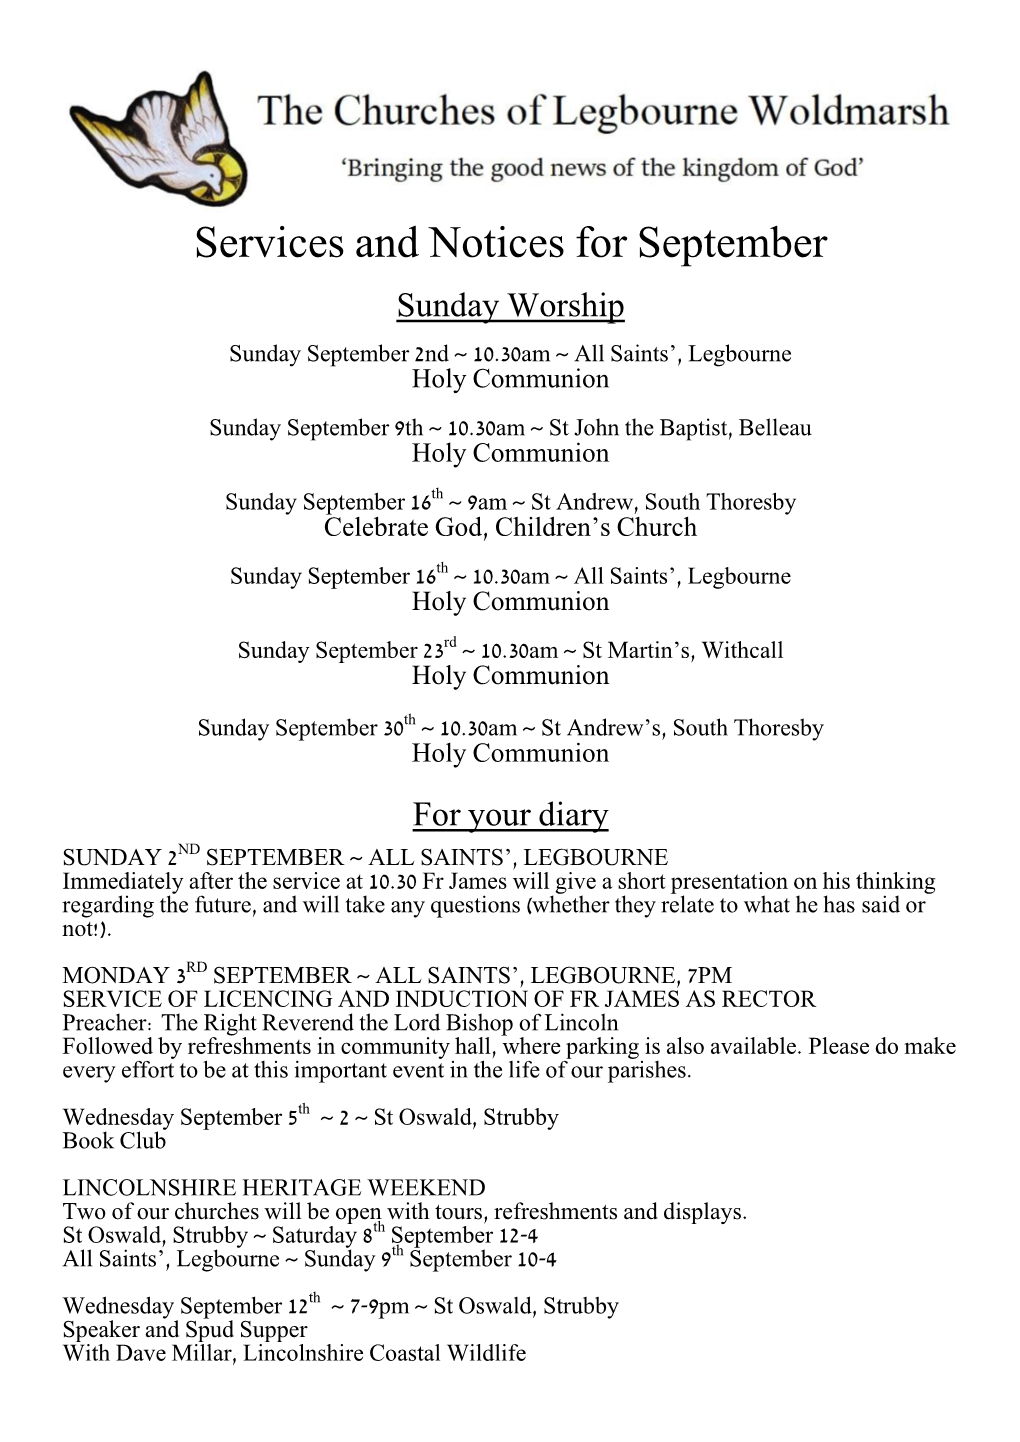 Services and Notices for September